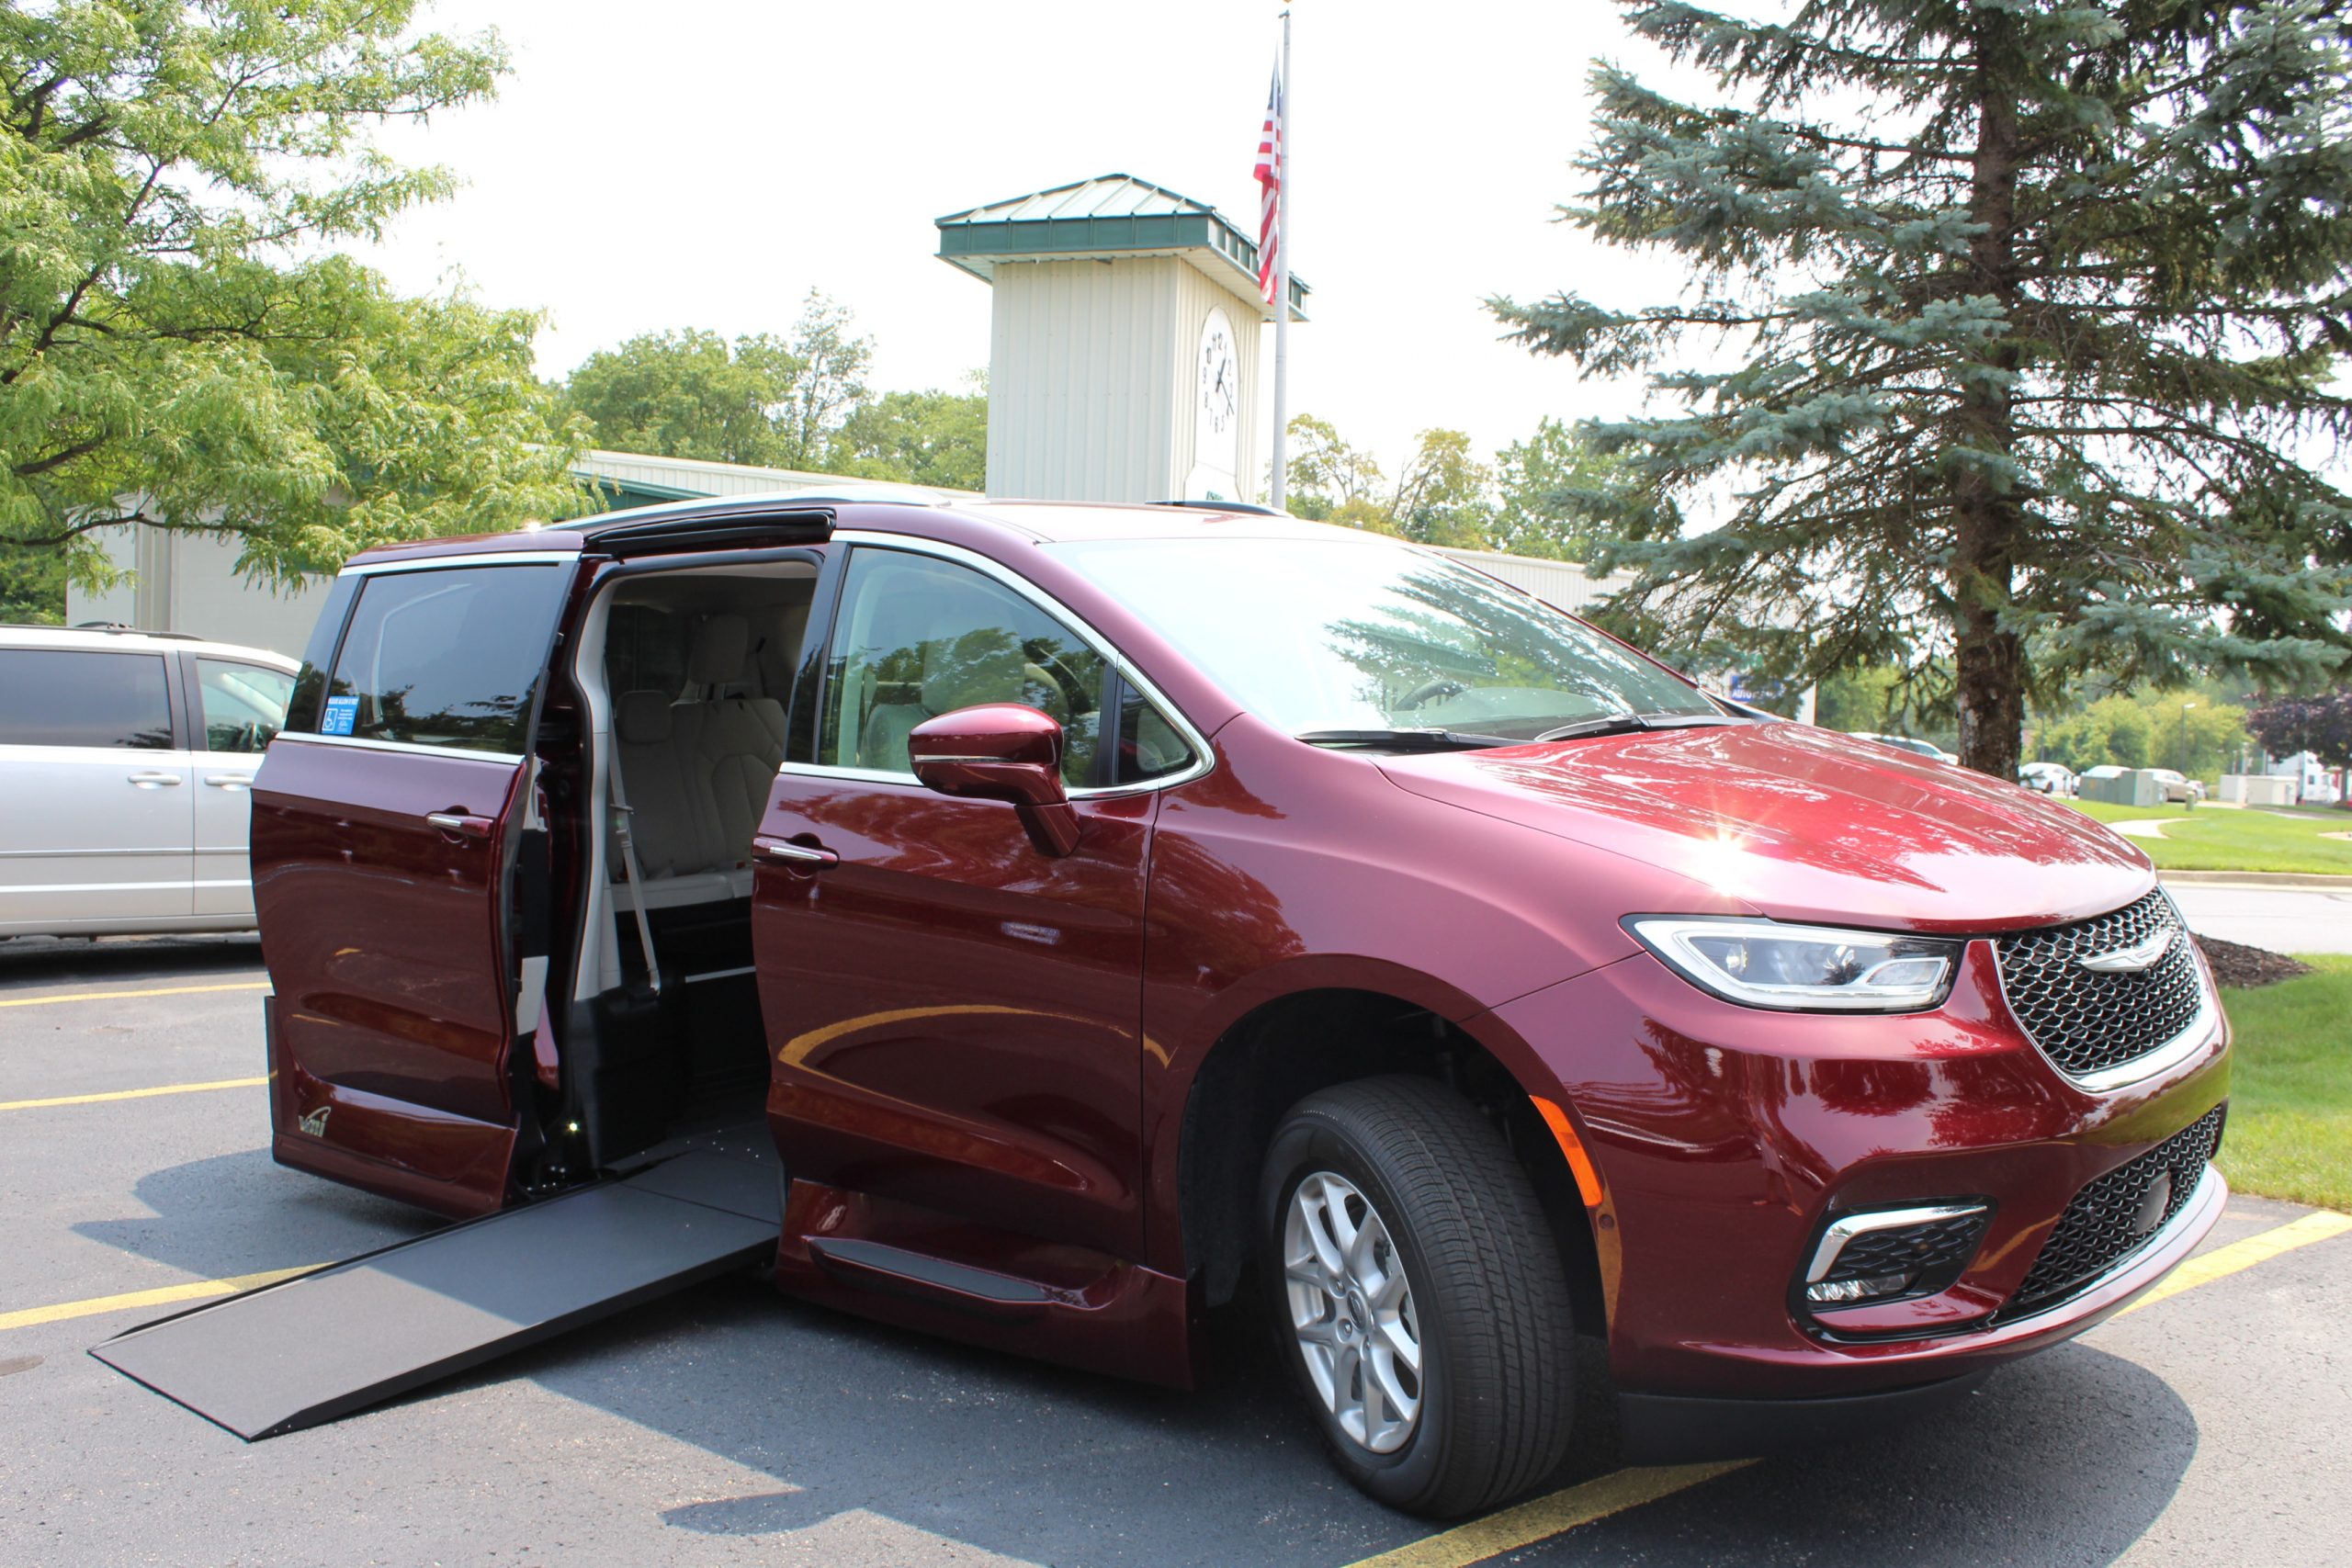 2021 Velvet Red Chrysler Pacifica Touring L with VMI Northstar Conversion